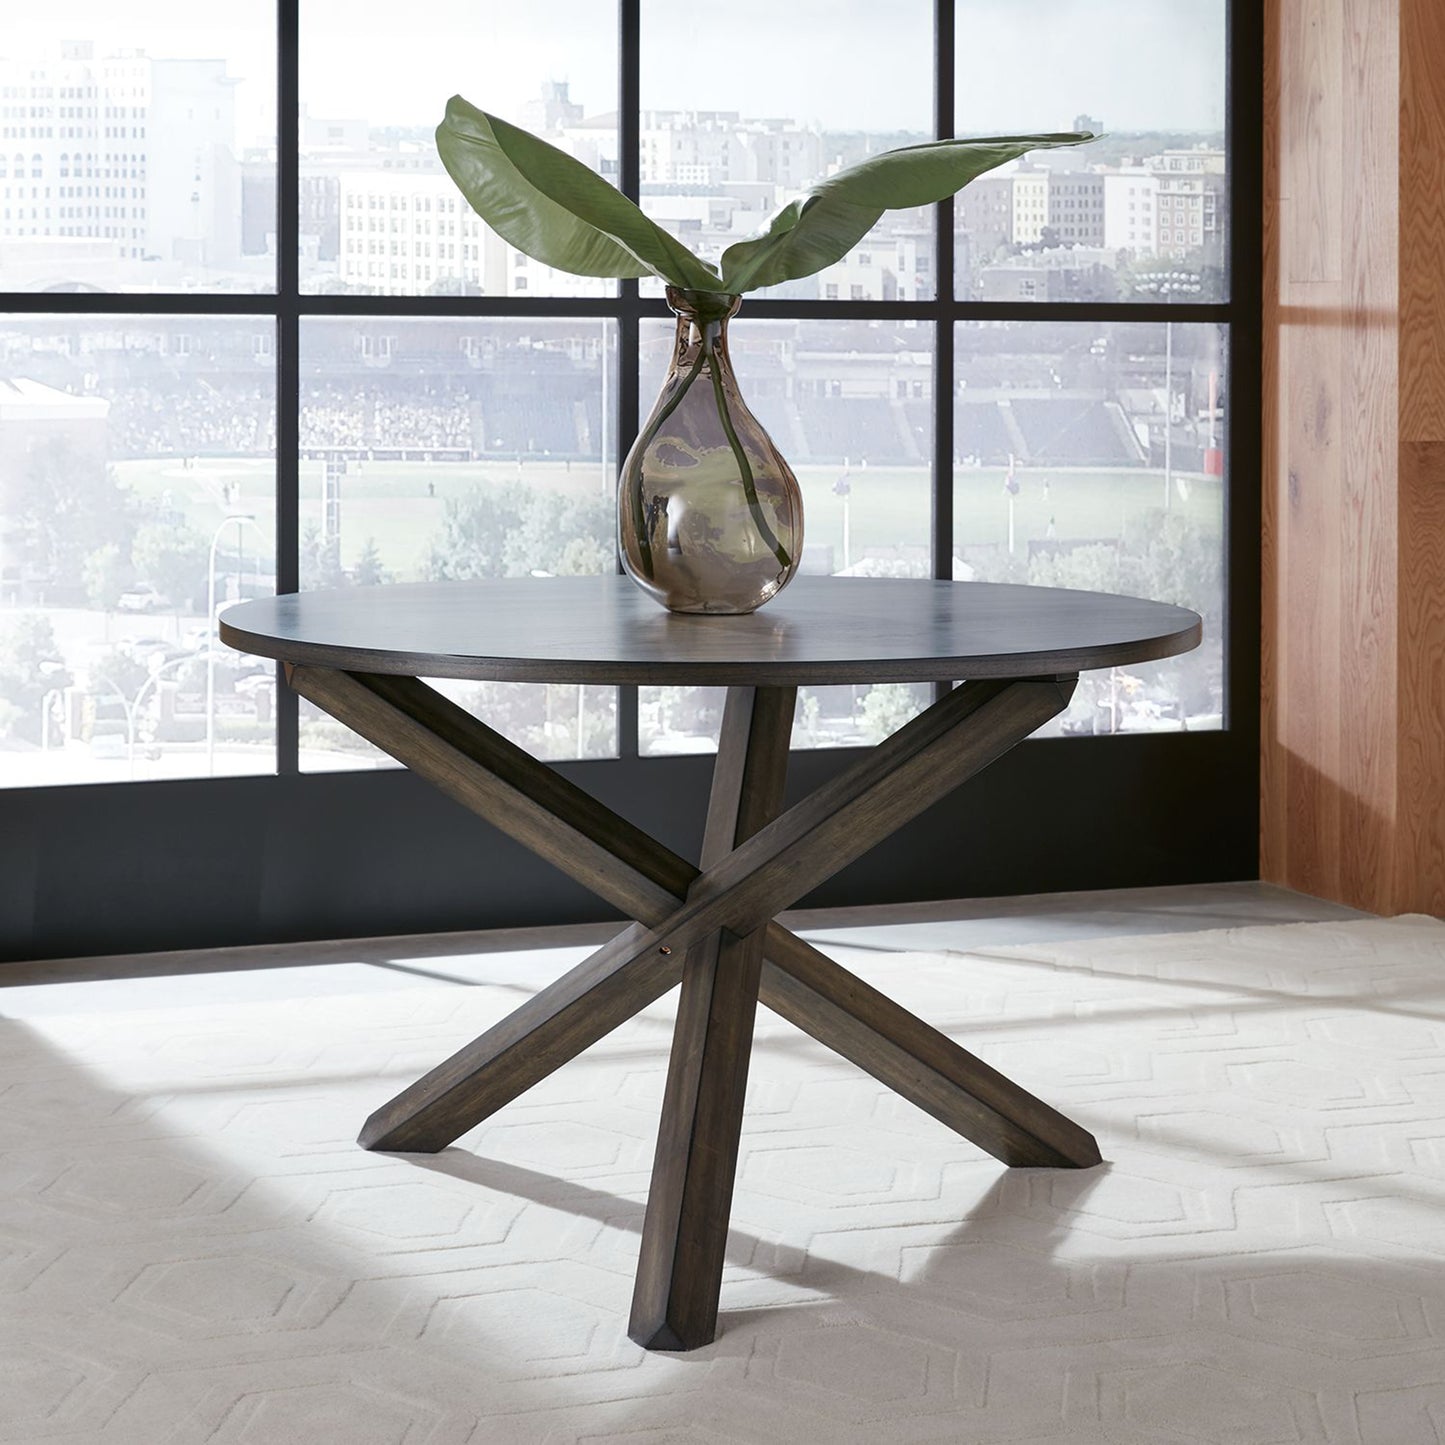 Almeta Transitional Round Dining Table with Crisscross X Base - Dark Umber Brown Finish